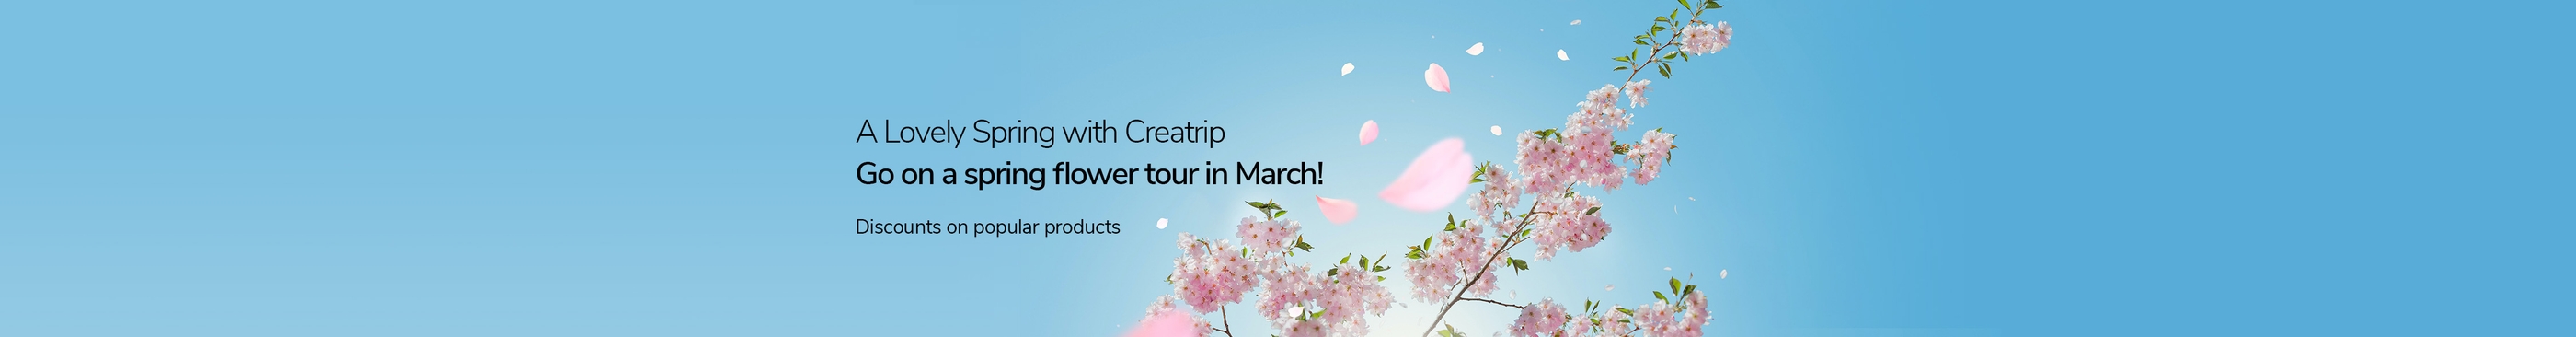 A Lovely Spring with Creatrip